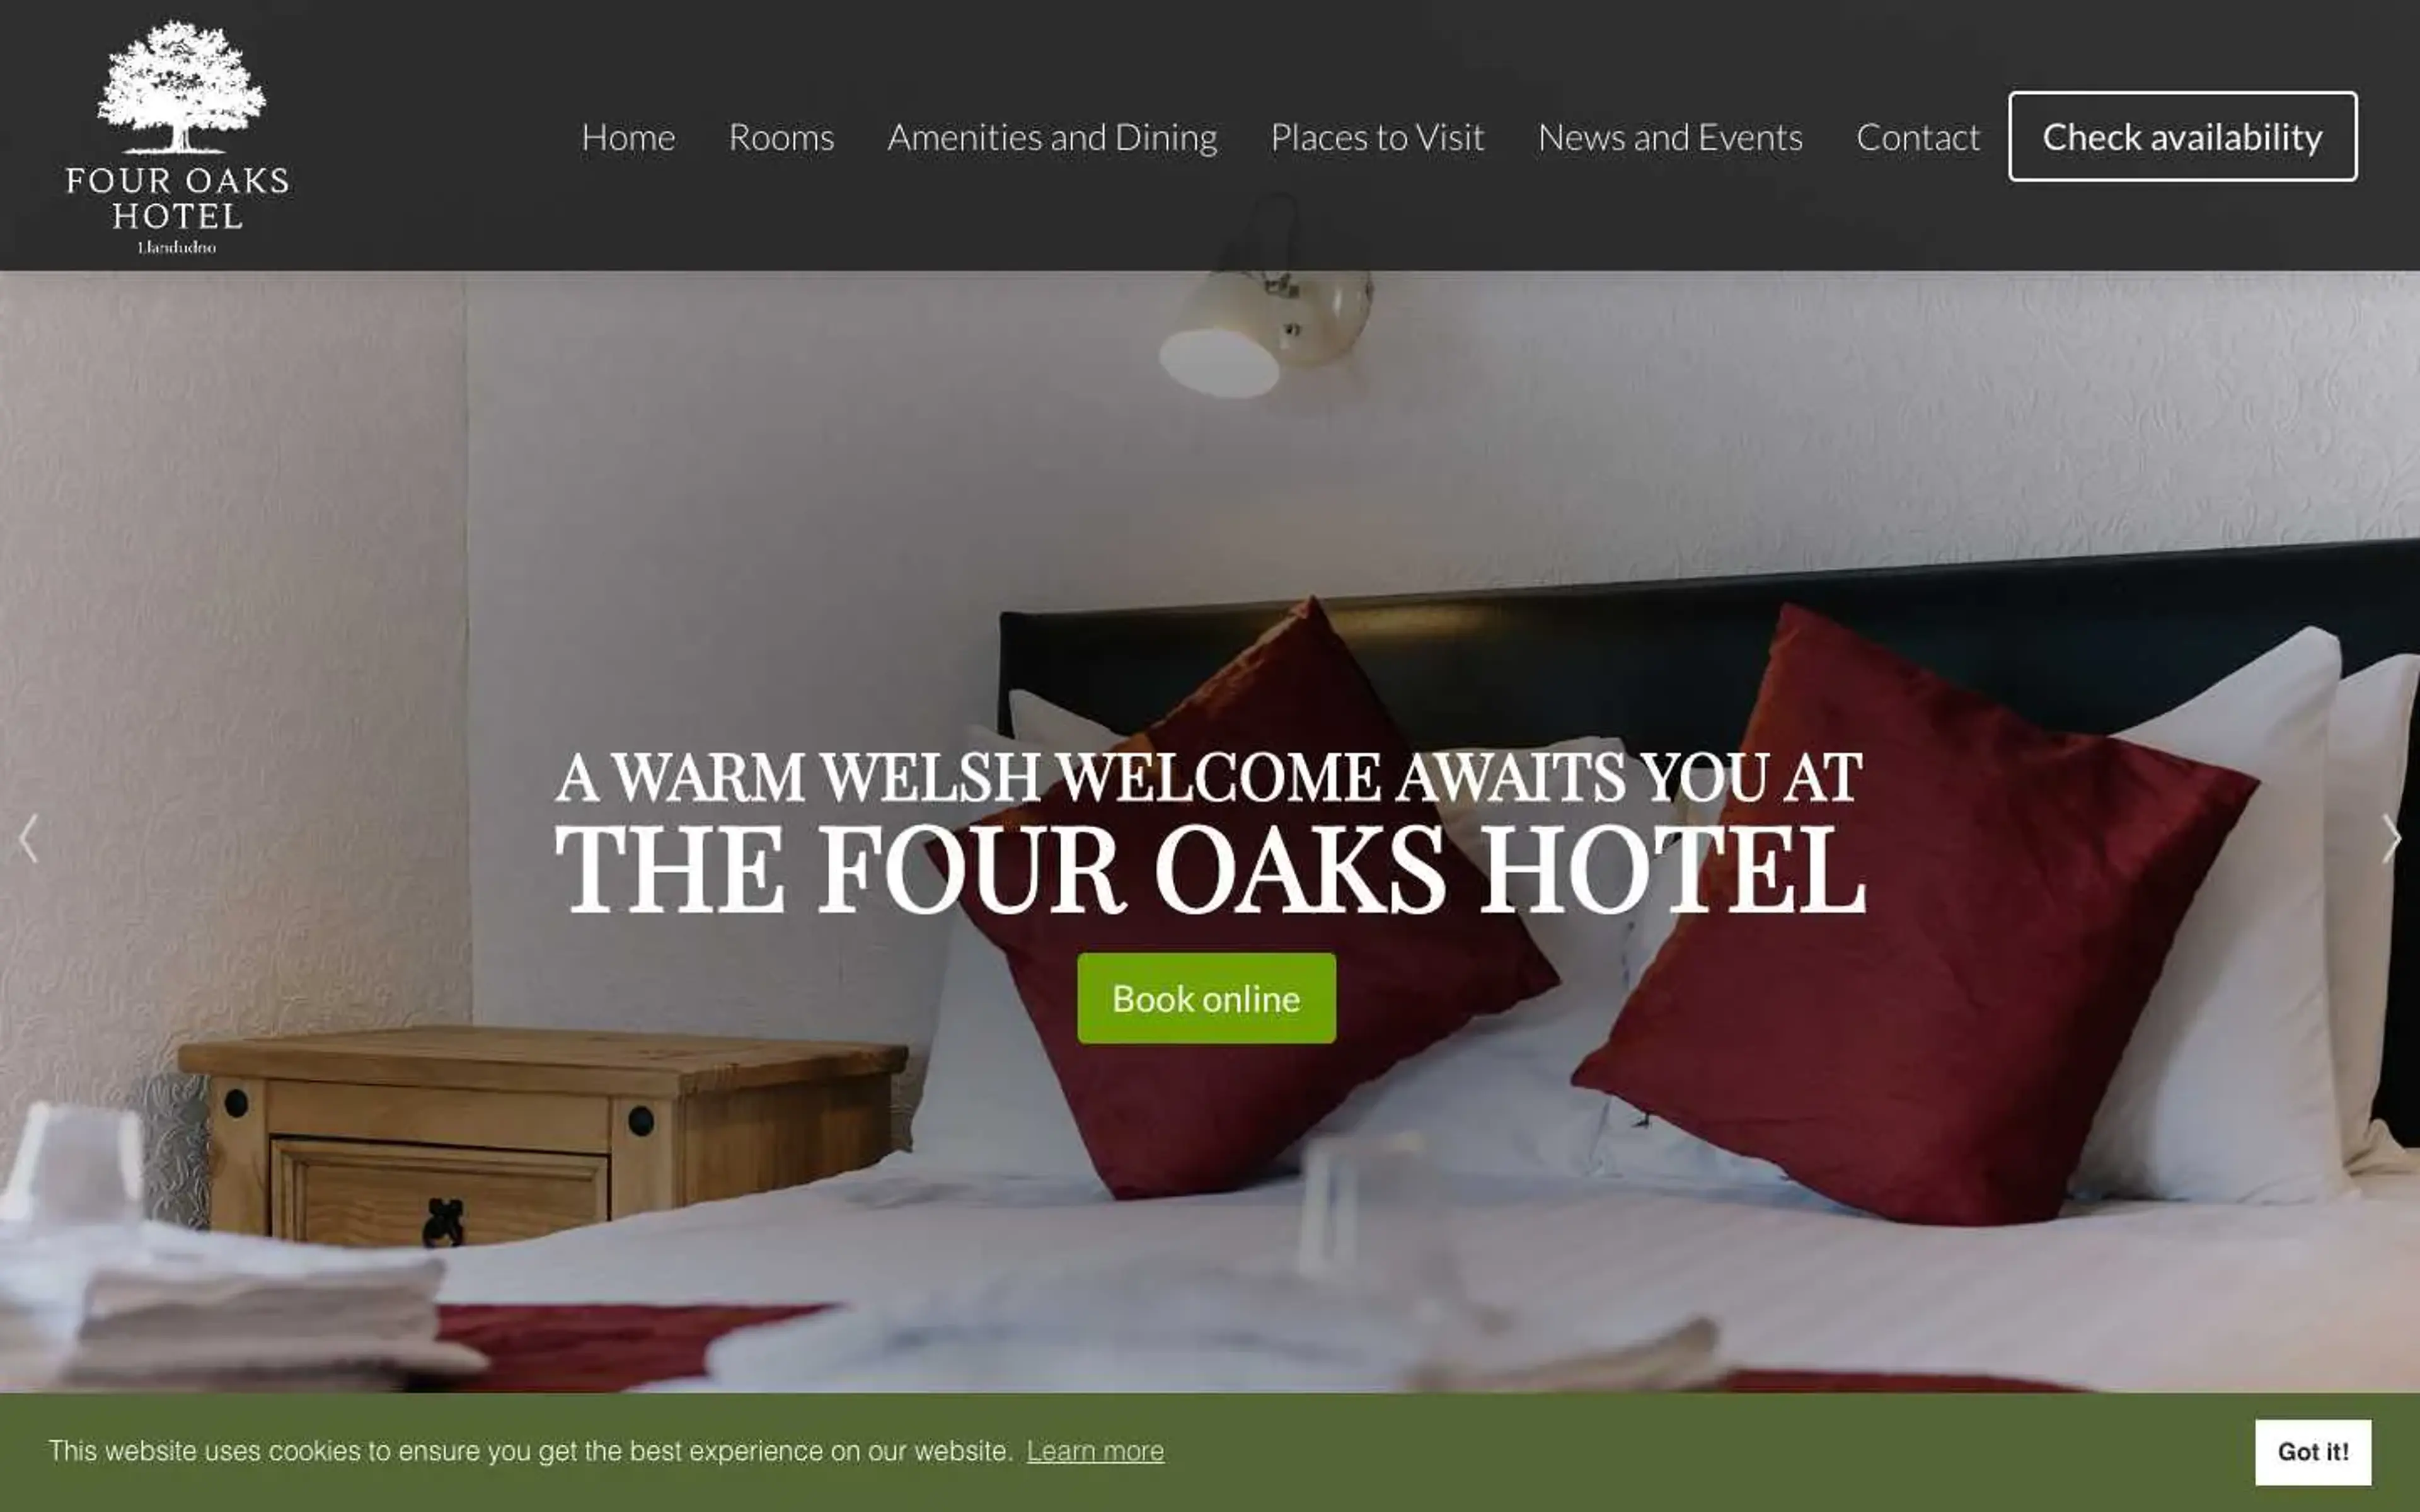 Recent project we worked on for Four Oaks Hotel